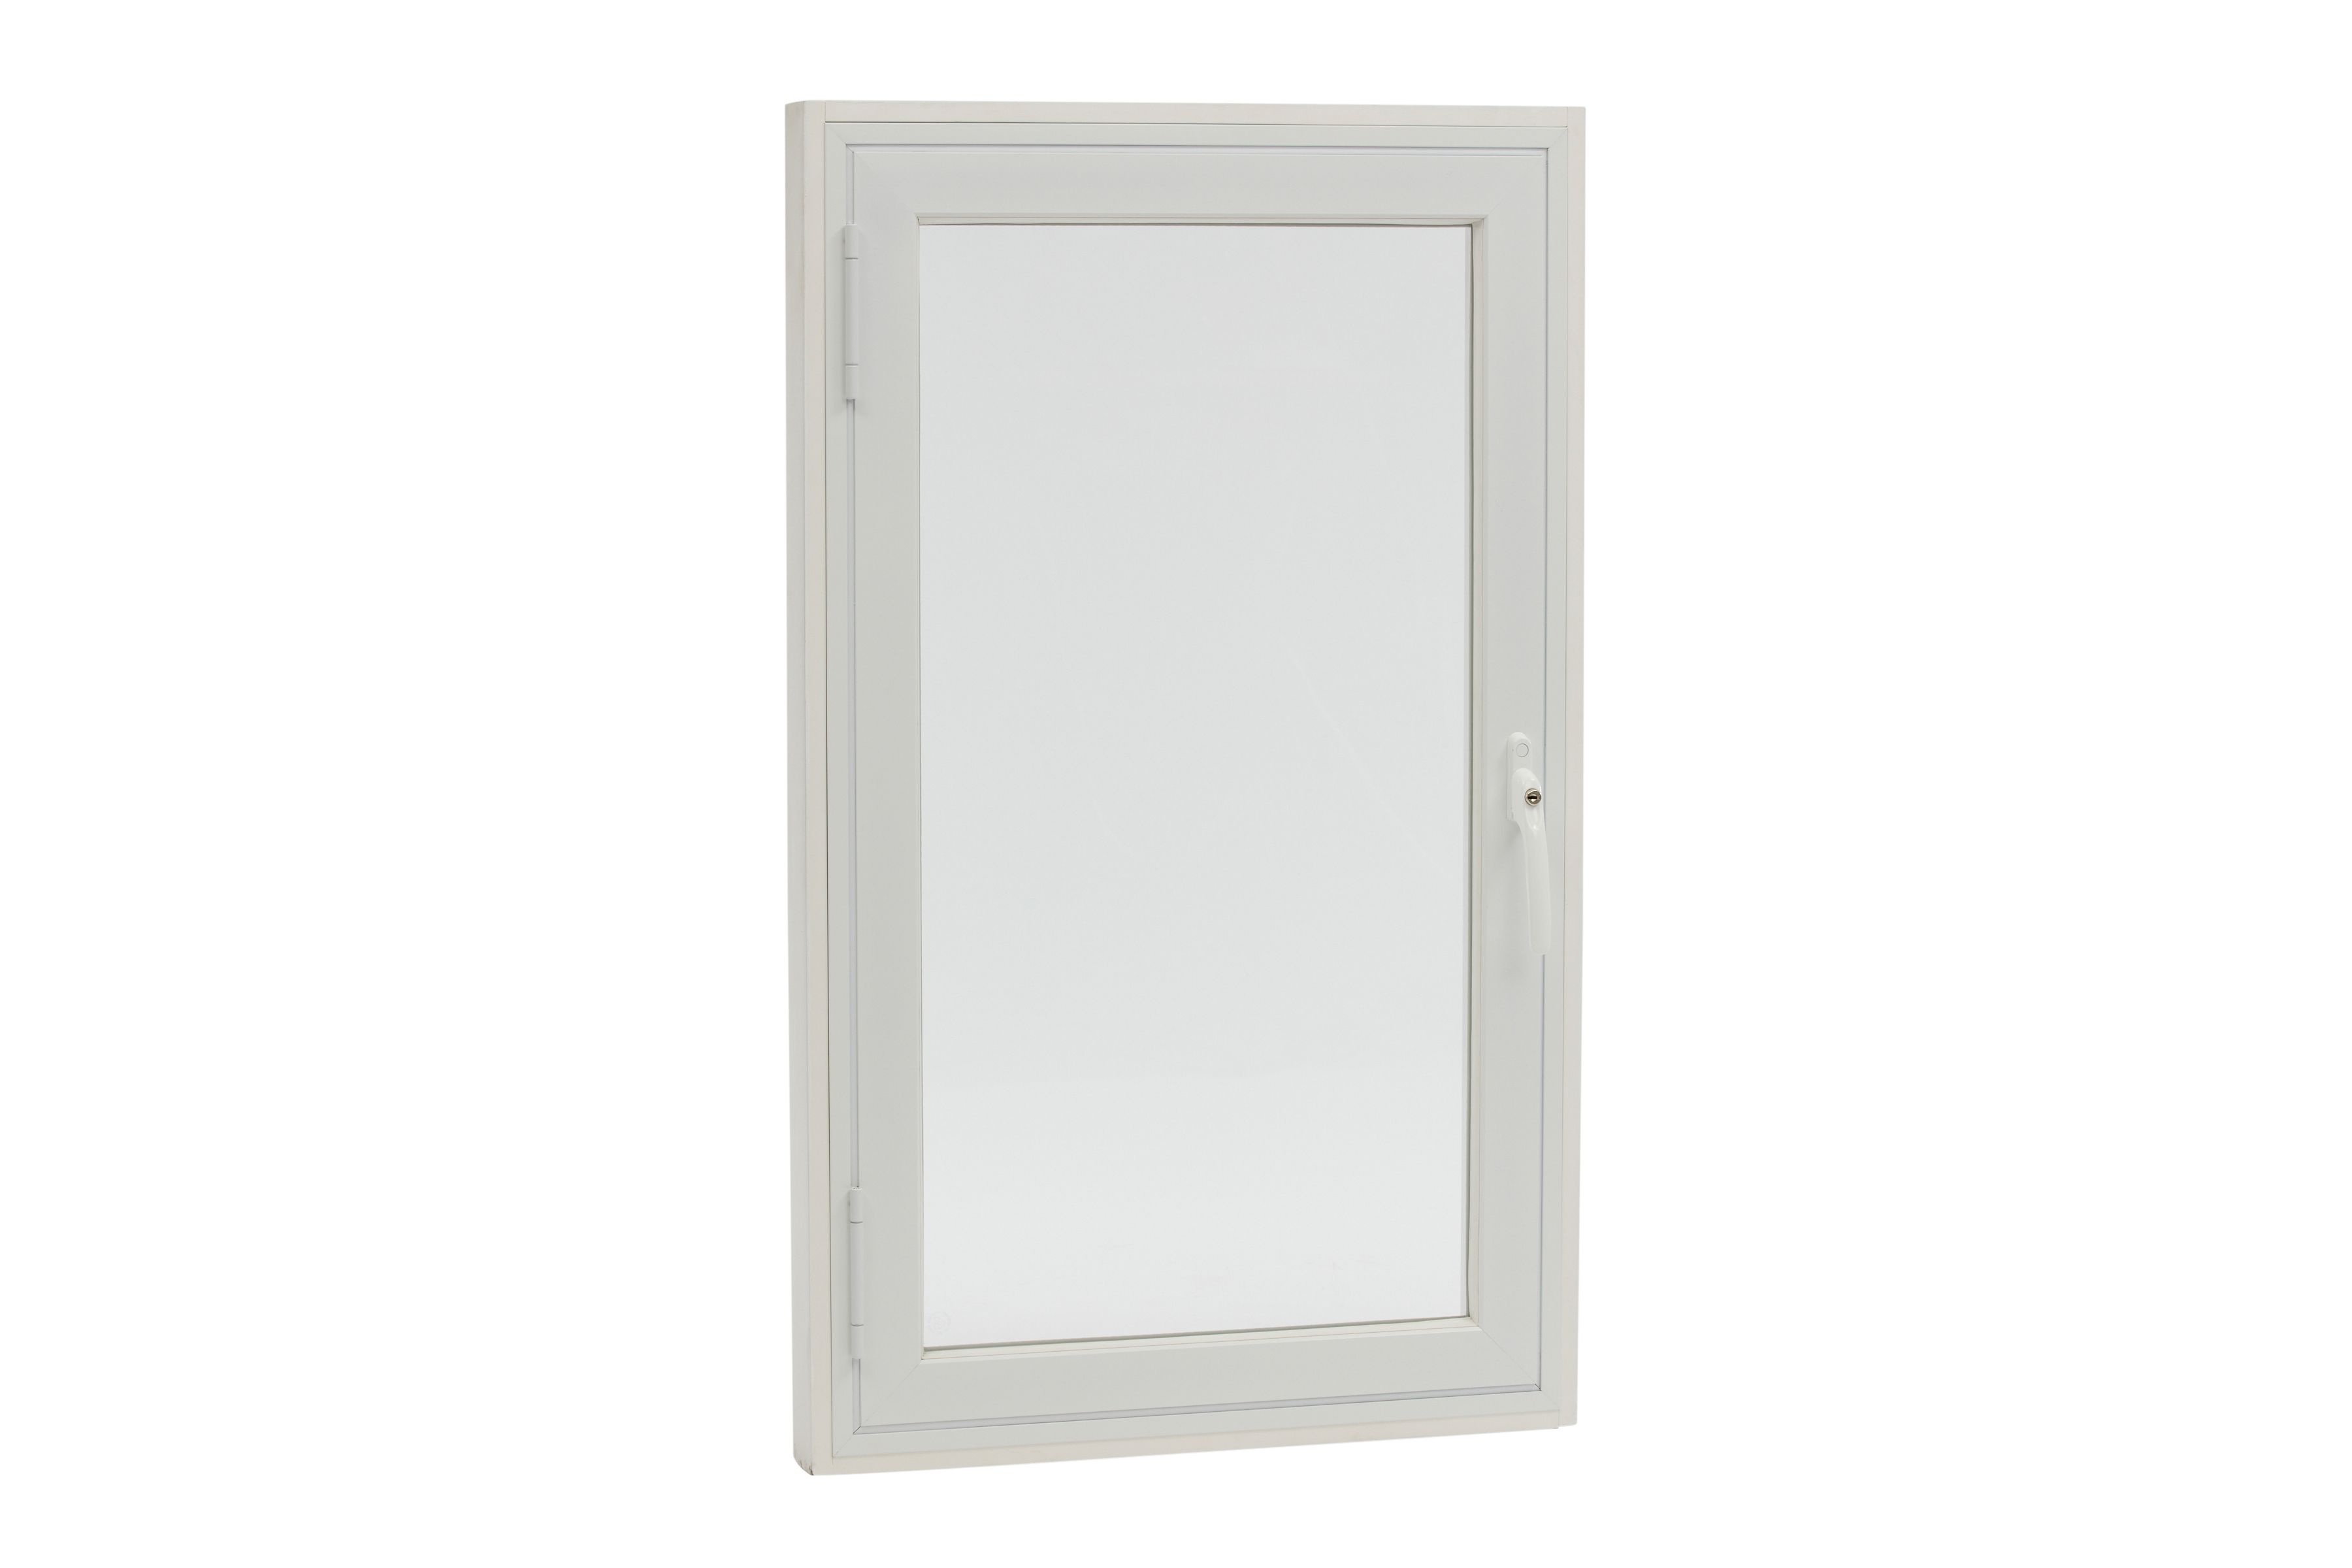 Great deals on Hinged secondary glazing unit,single panel